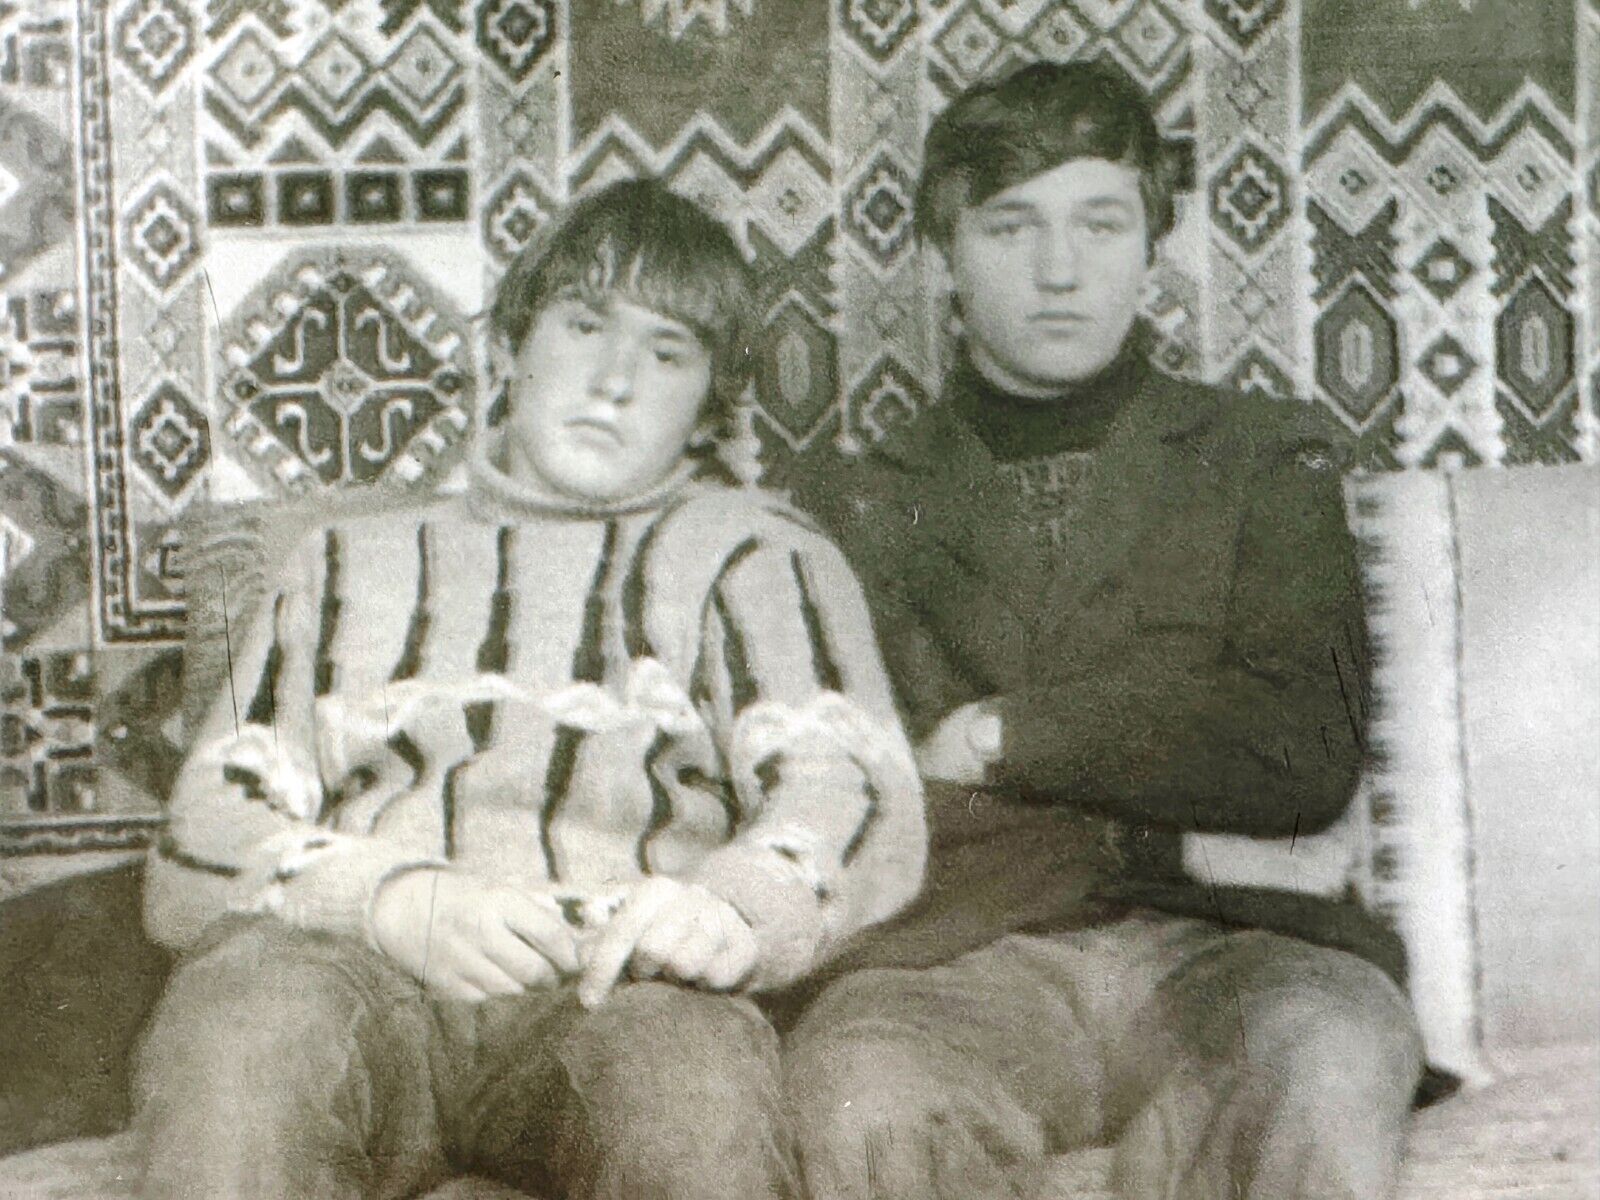 1970s Two Affectionate Handsome Men Students Guys Sitting on Sofa Vintage Photo